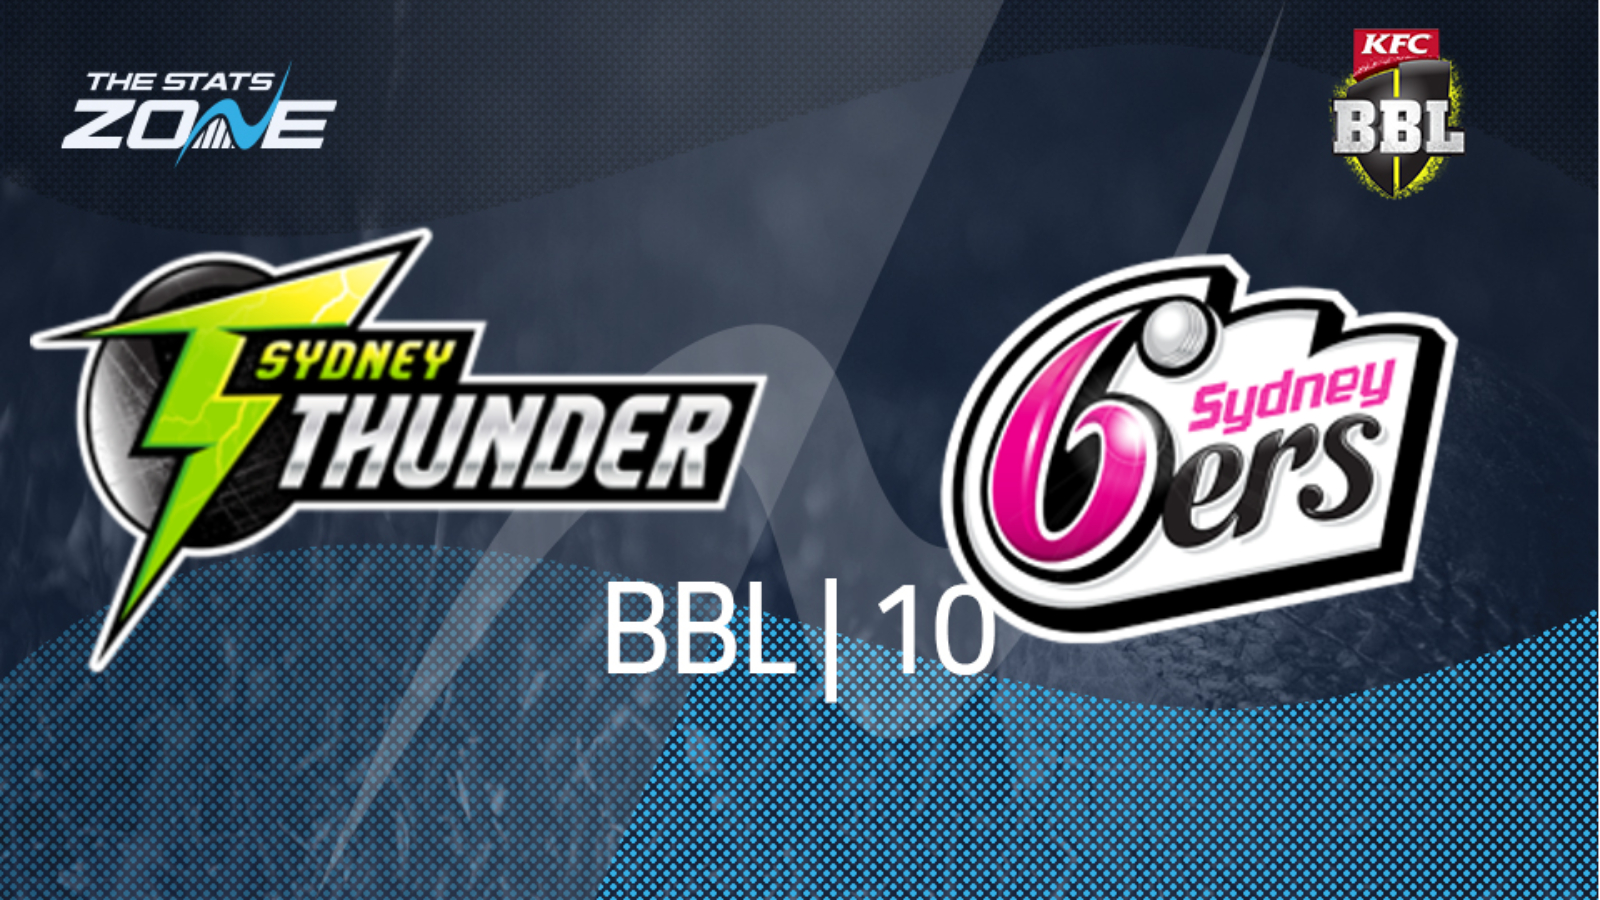 2020 21 Big Bash League Sydney Thunder Vs Sydney Sixers Preview Prediction The Stats Zone